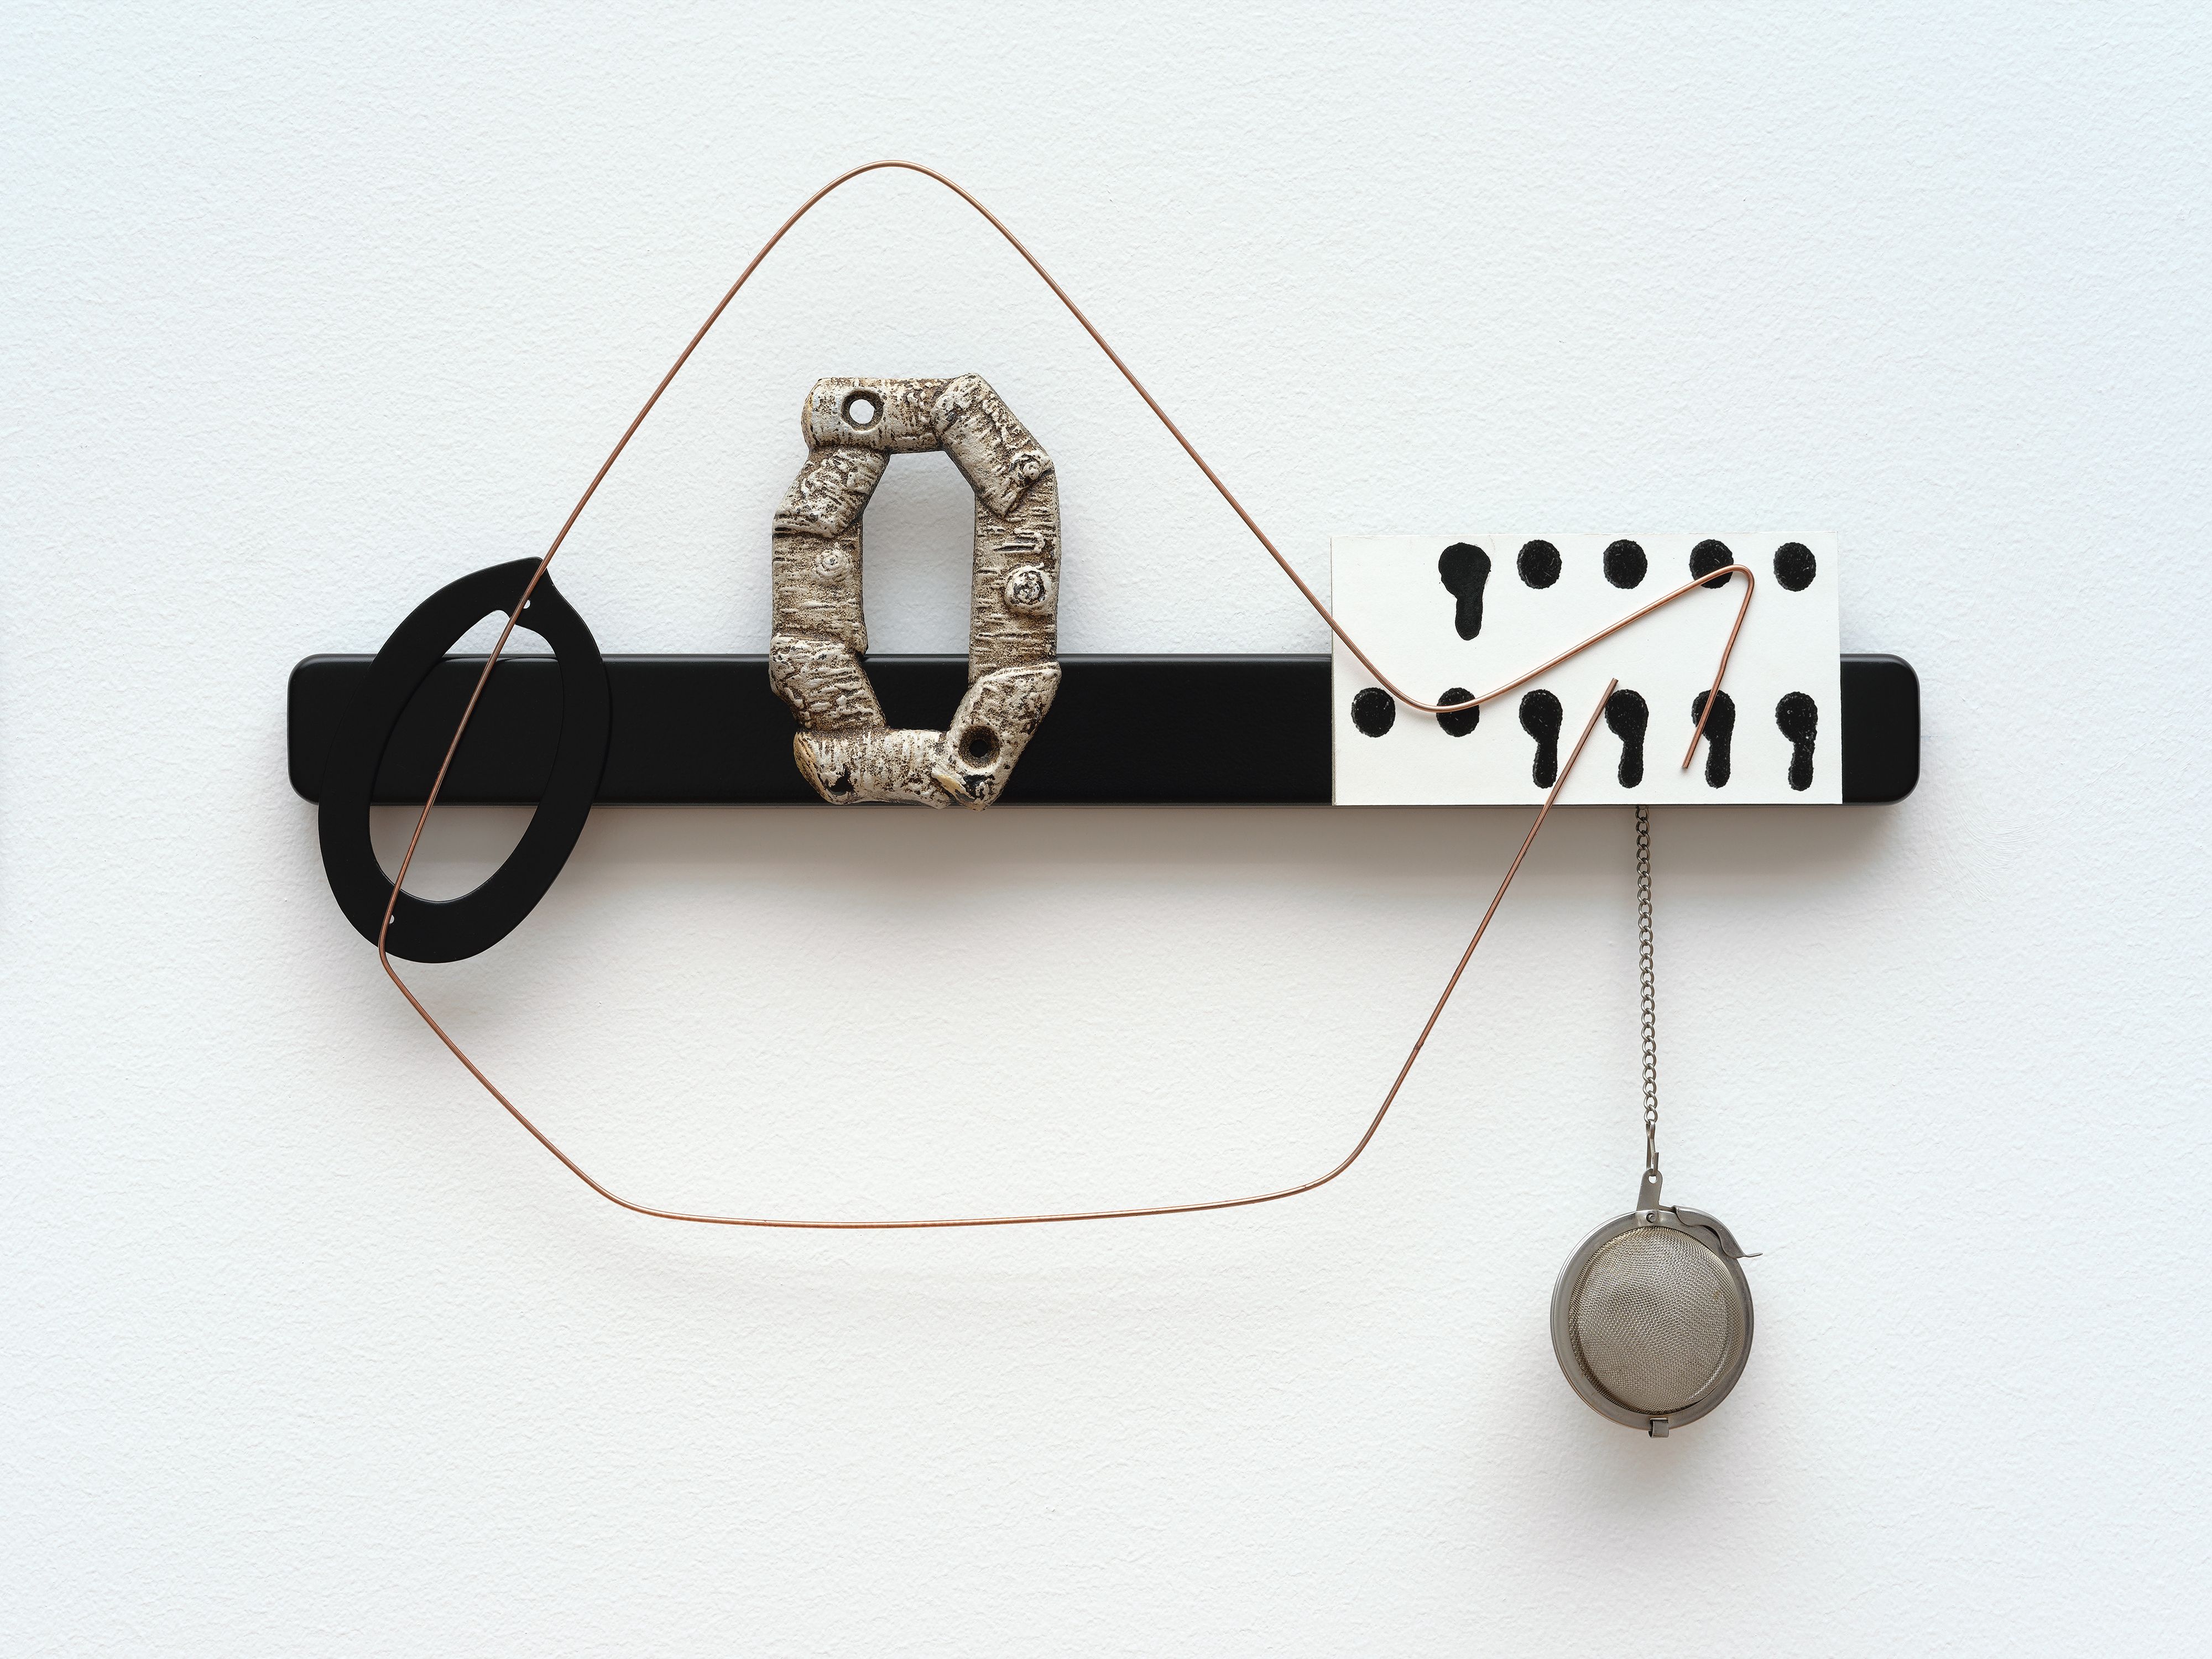 Sara Magenheimer, Across the Accordion of Sky and Telescoped Voices (After Cendrars), 2016, knife rack, steel wire, house numbers, painted pigment print, tea ball, 12 x 14 1/2 in. (30.48 x 36.83 cm)